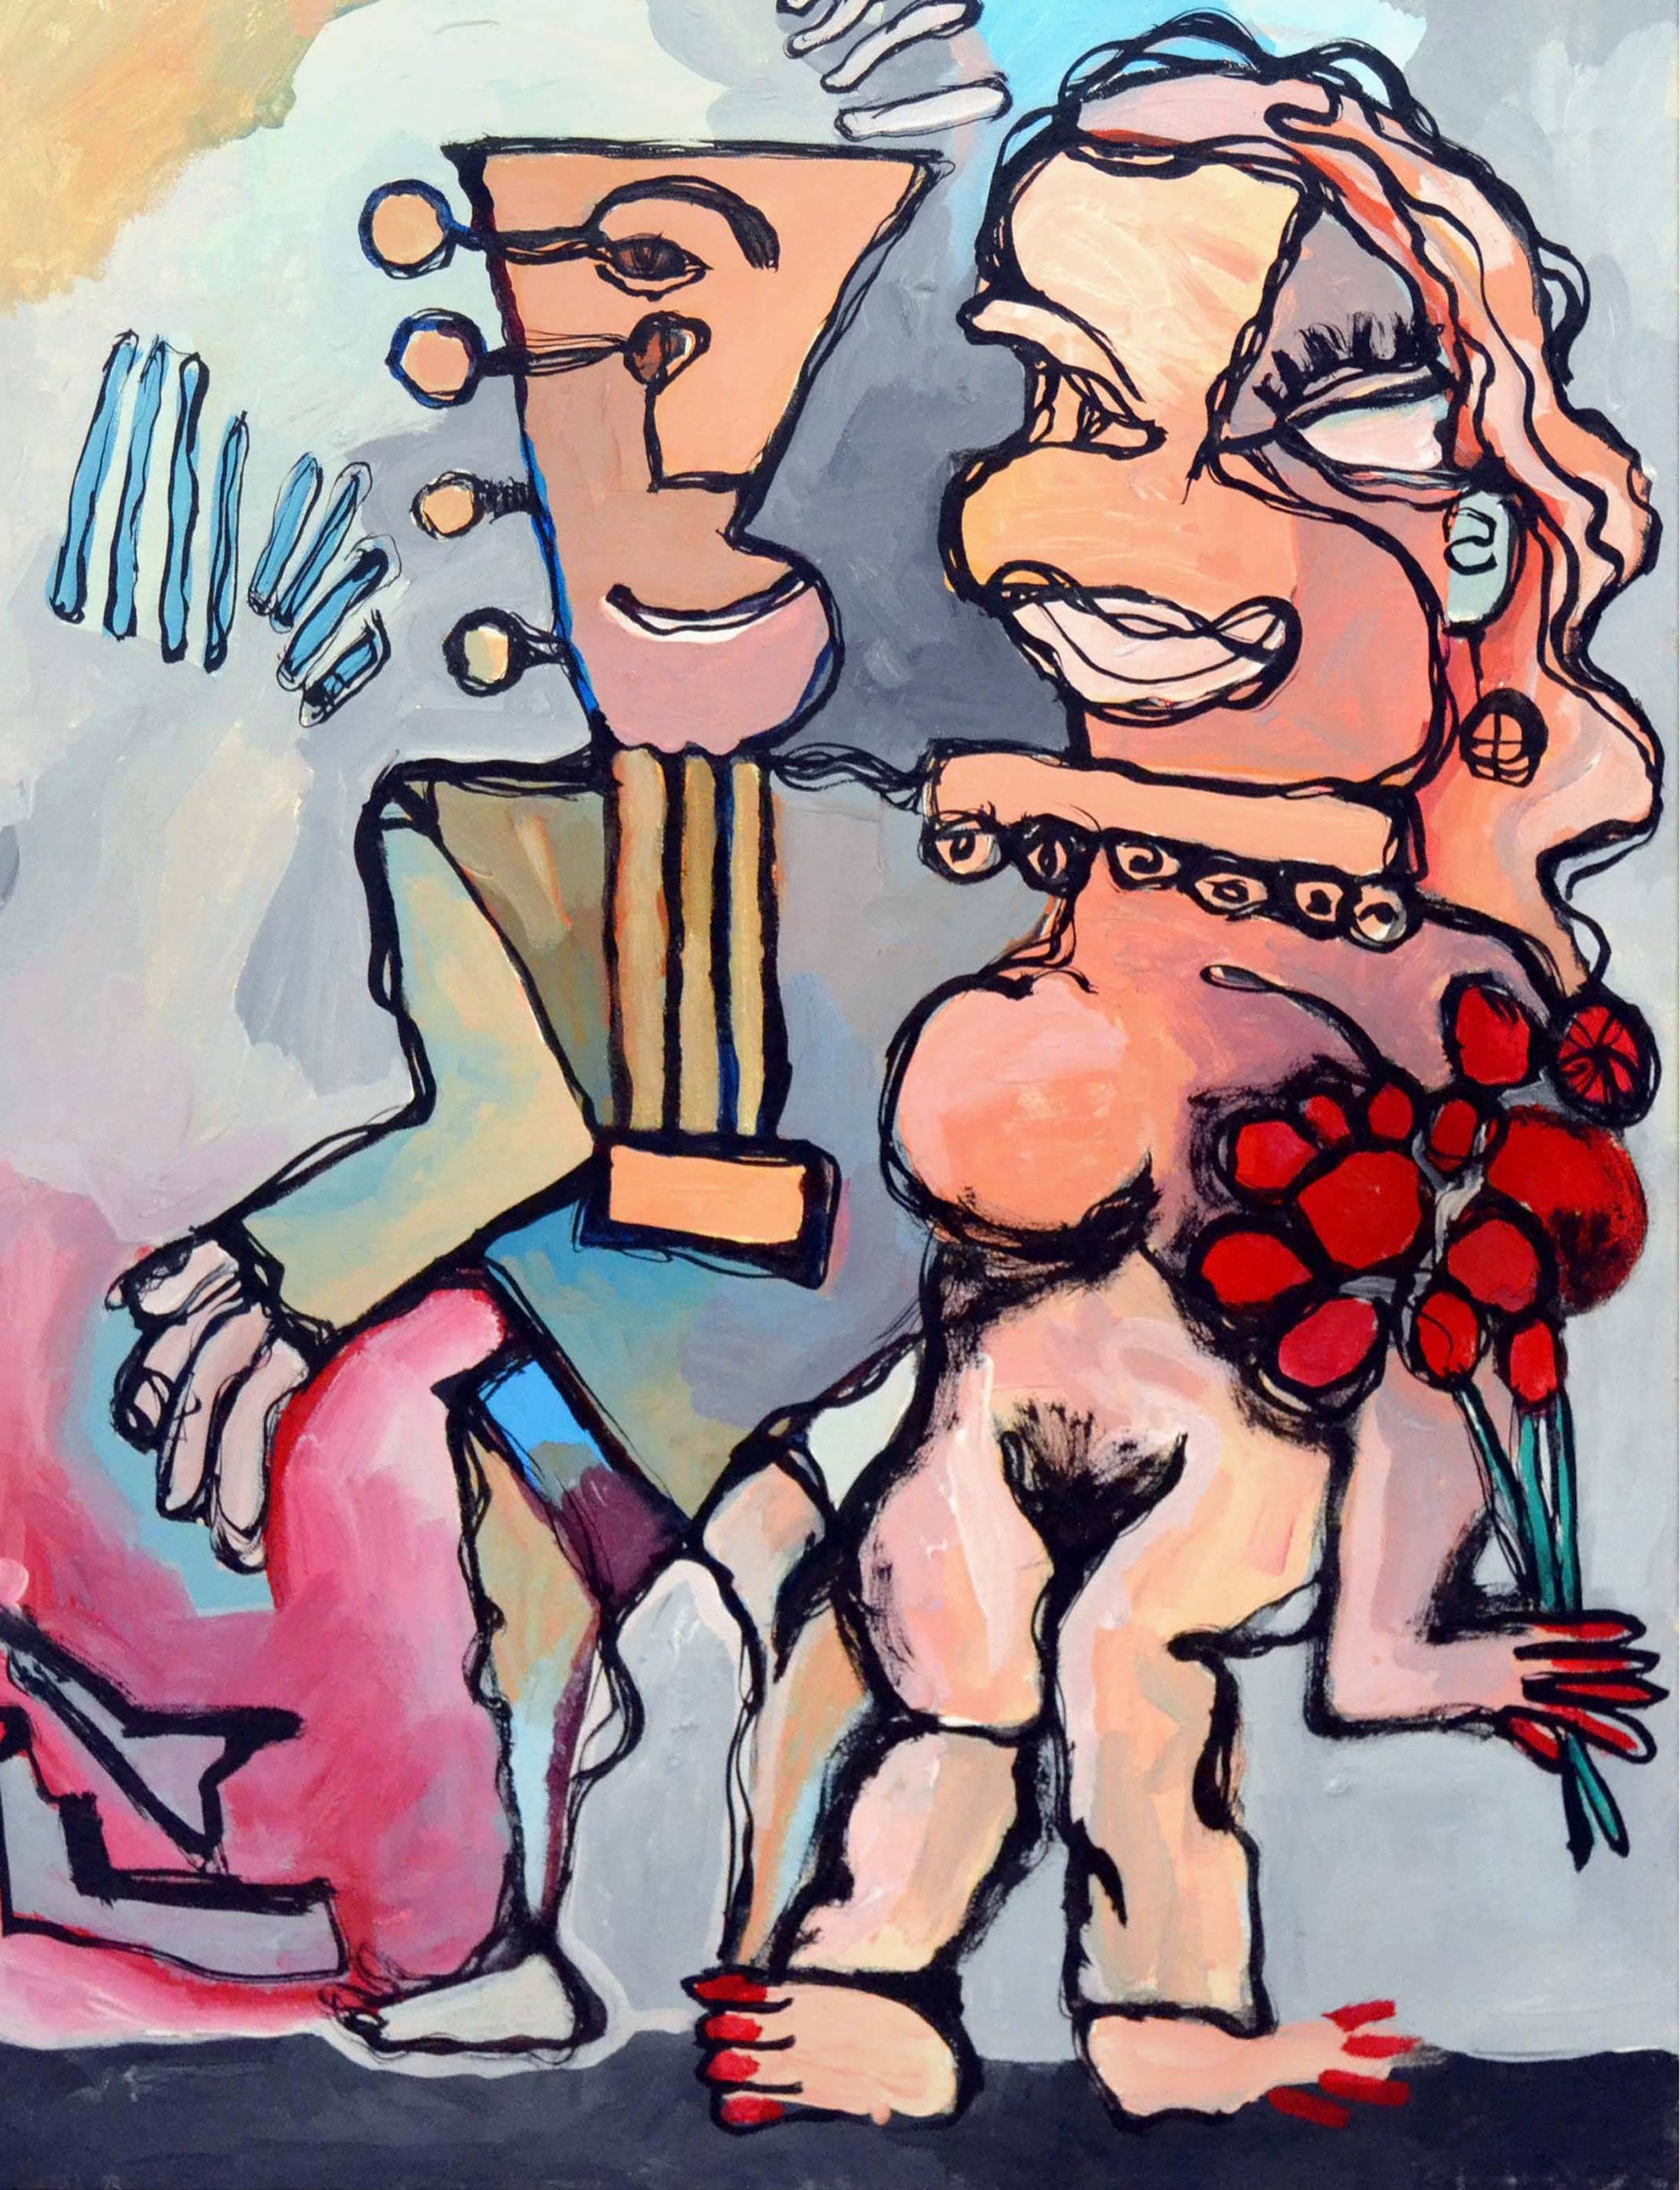 The Fun Couple, Contemporary Figurative Abstract  - Painting by Michael Eggleston